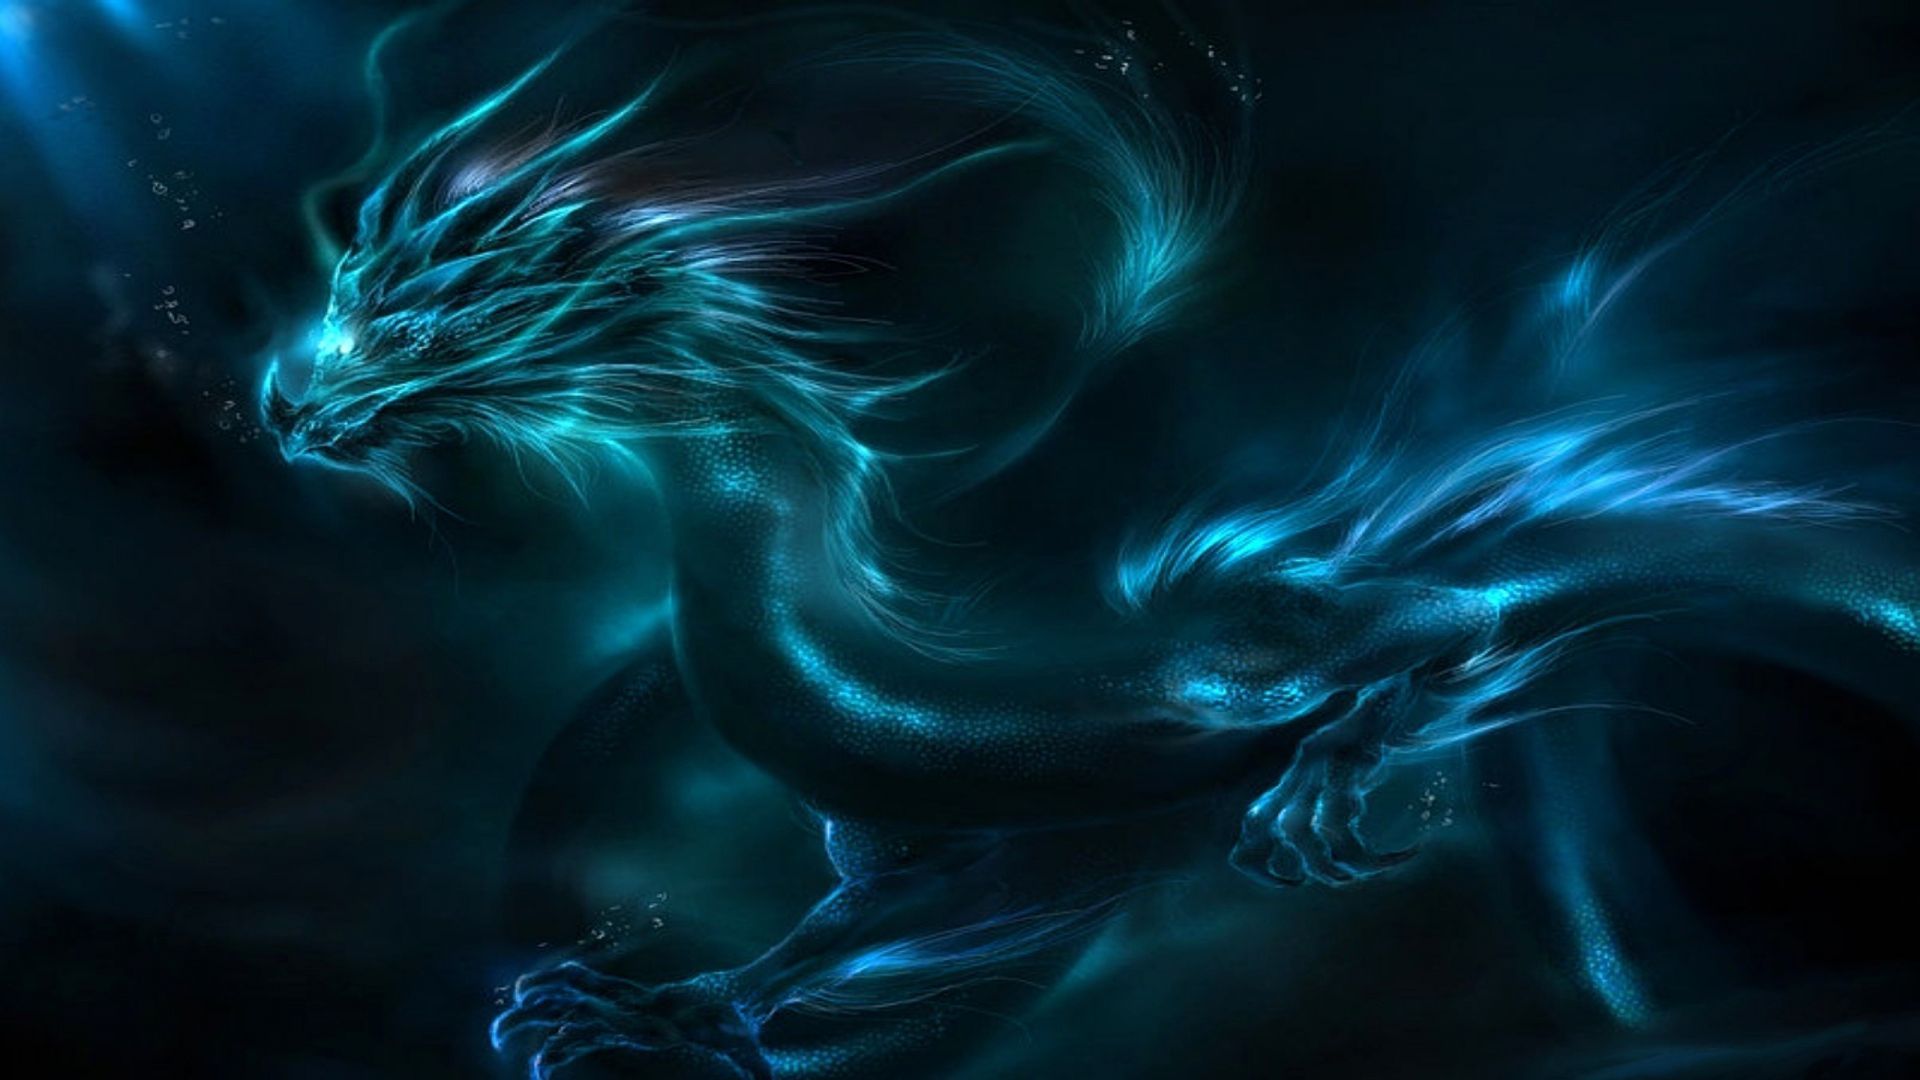 Dragon HD Wallpapers - HD Wallpapers Backgrounds of Your Choice